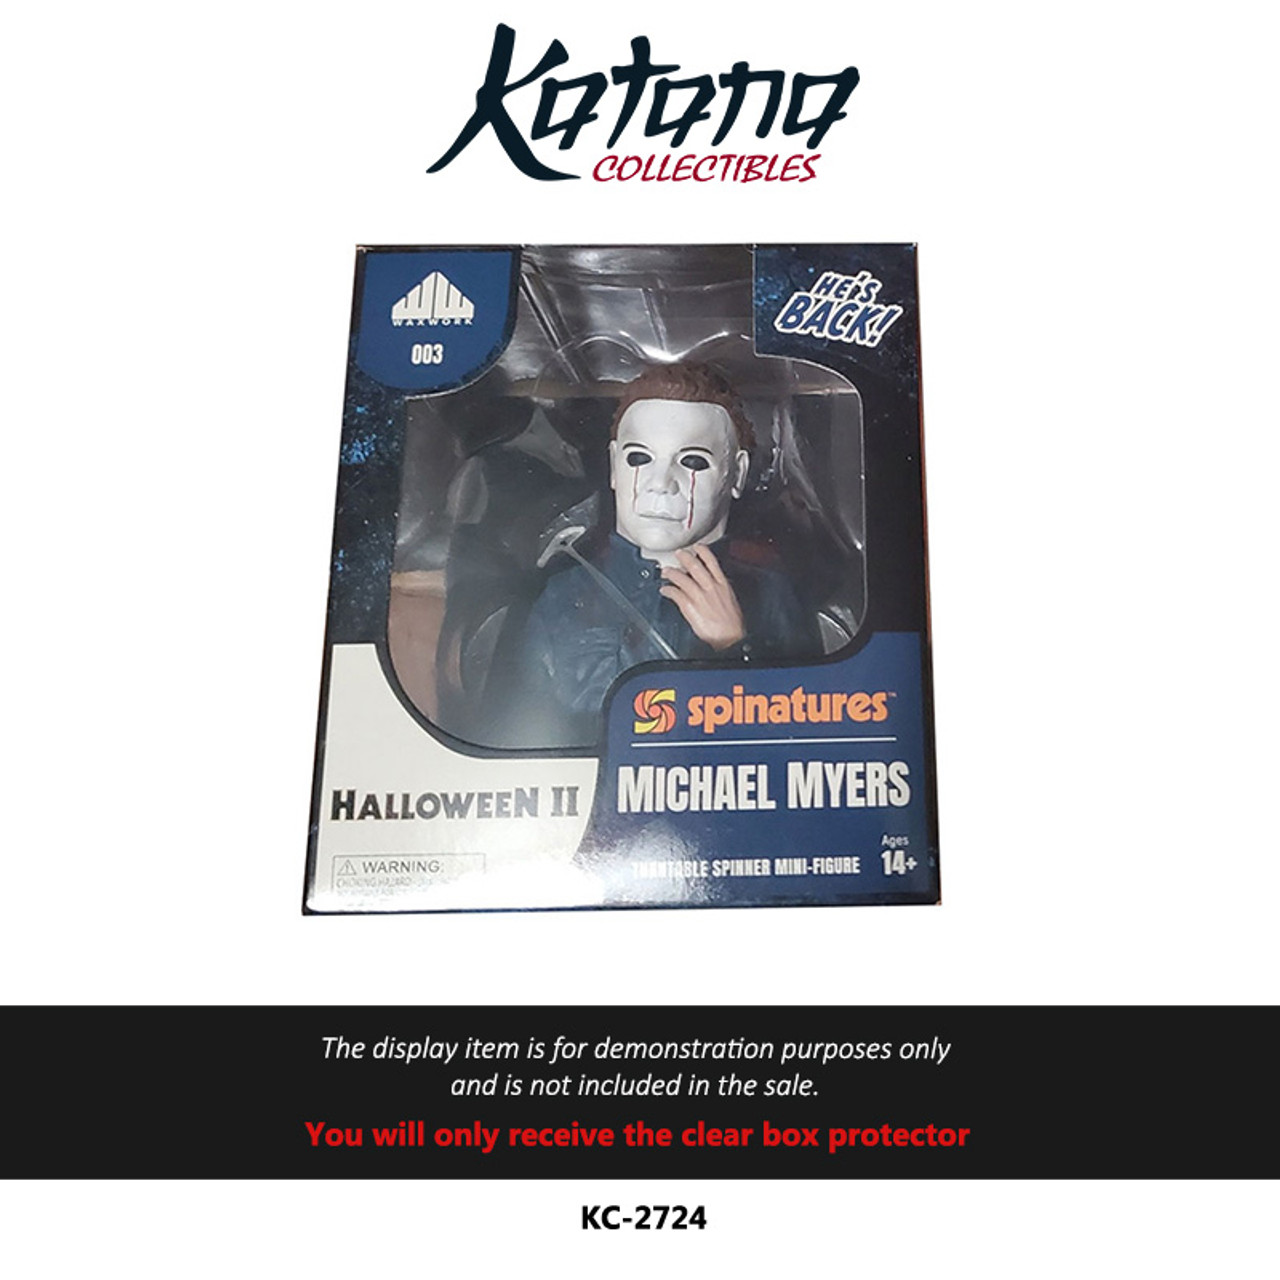 Katana Collectibles Protector For Spinatures Turnable Spinner Mini-Figure Halloween II Michael Myers